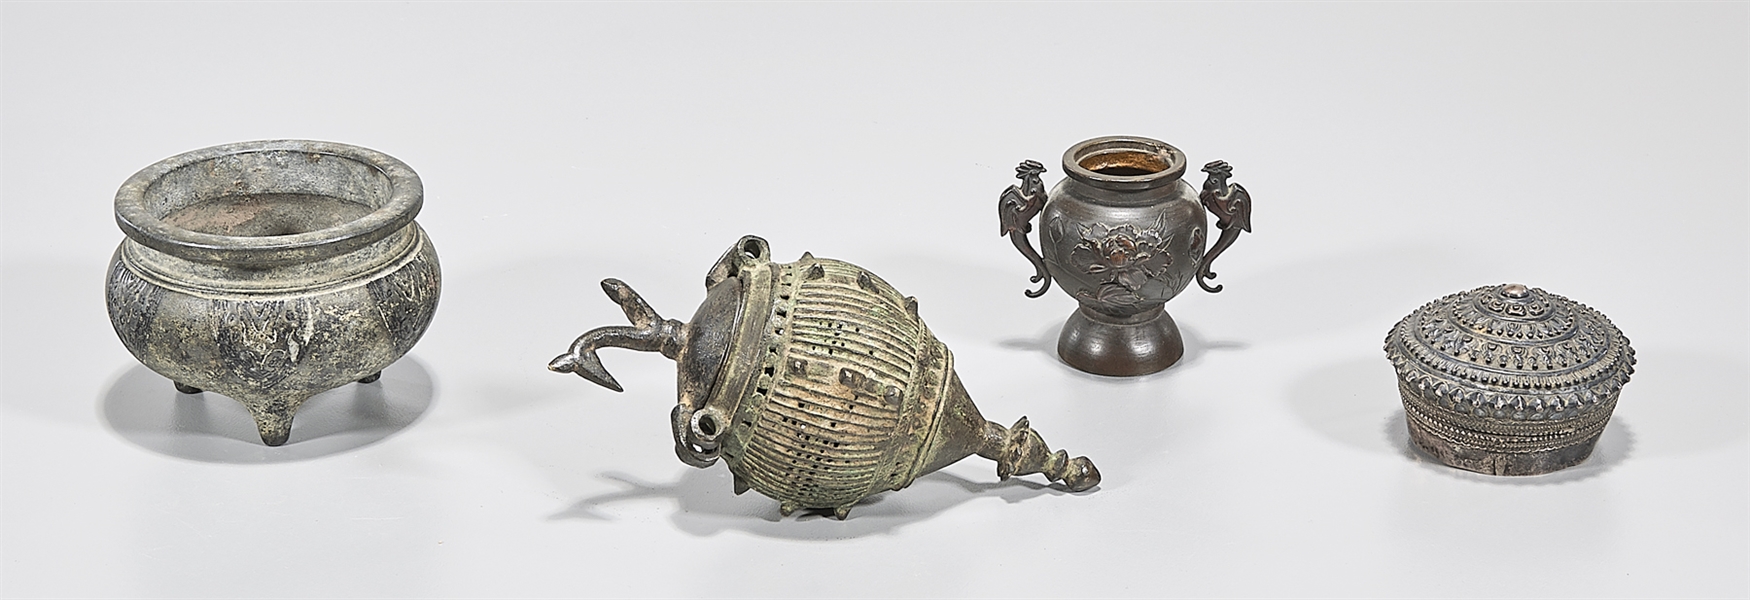 Group of Four Asian Bronze Vessels